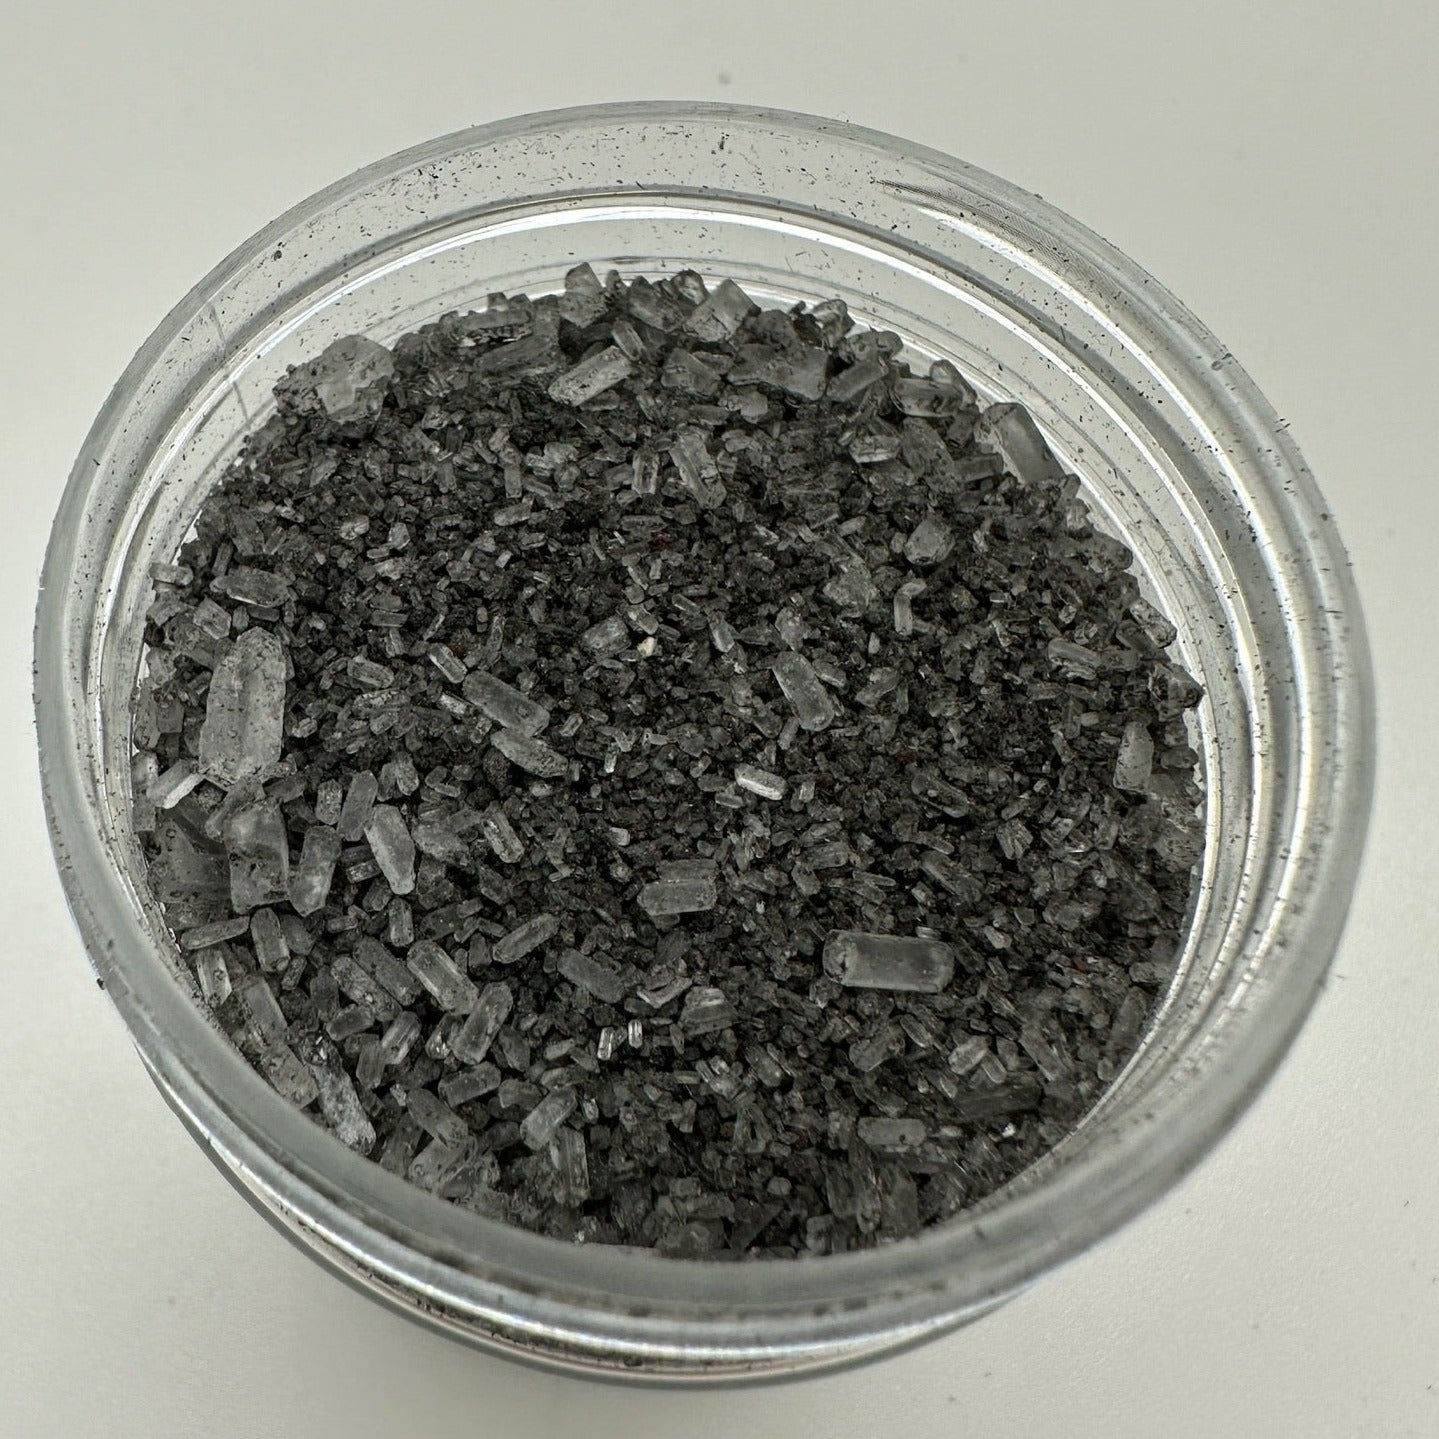 Black colored bath salts in a clear jar that is open